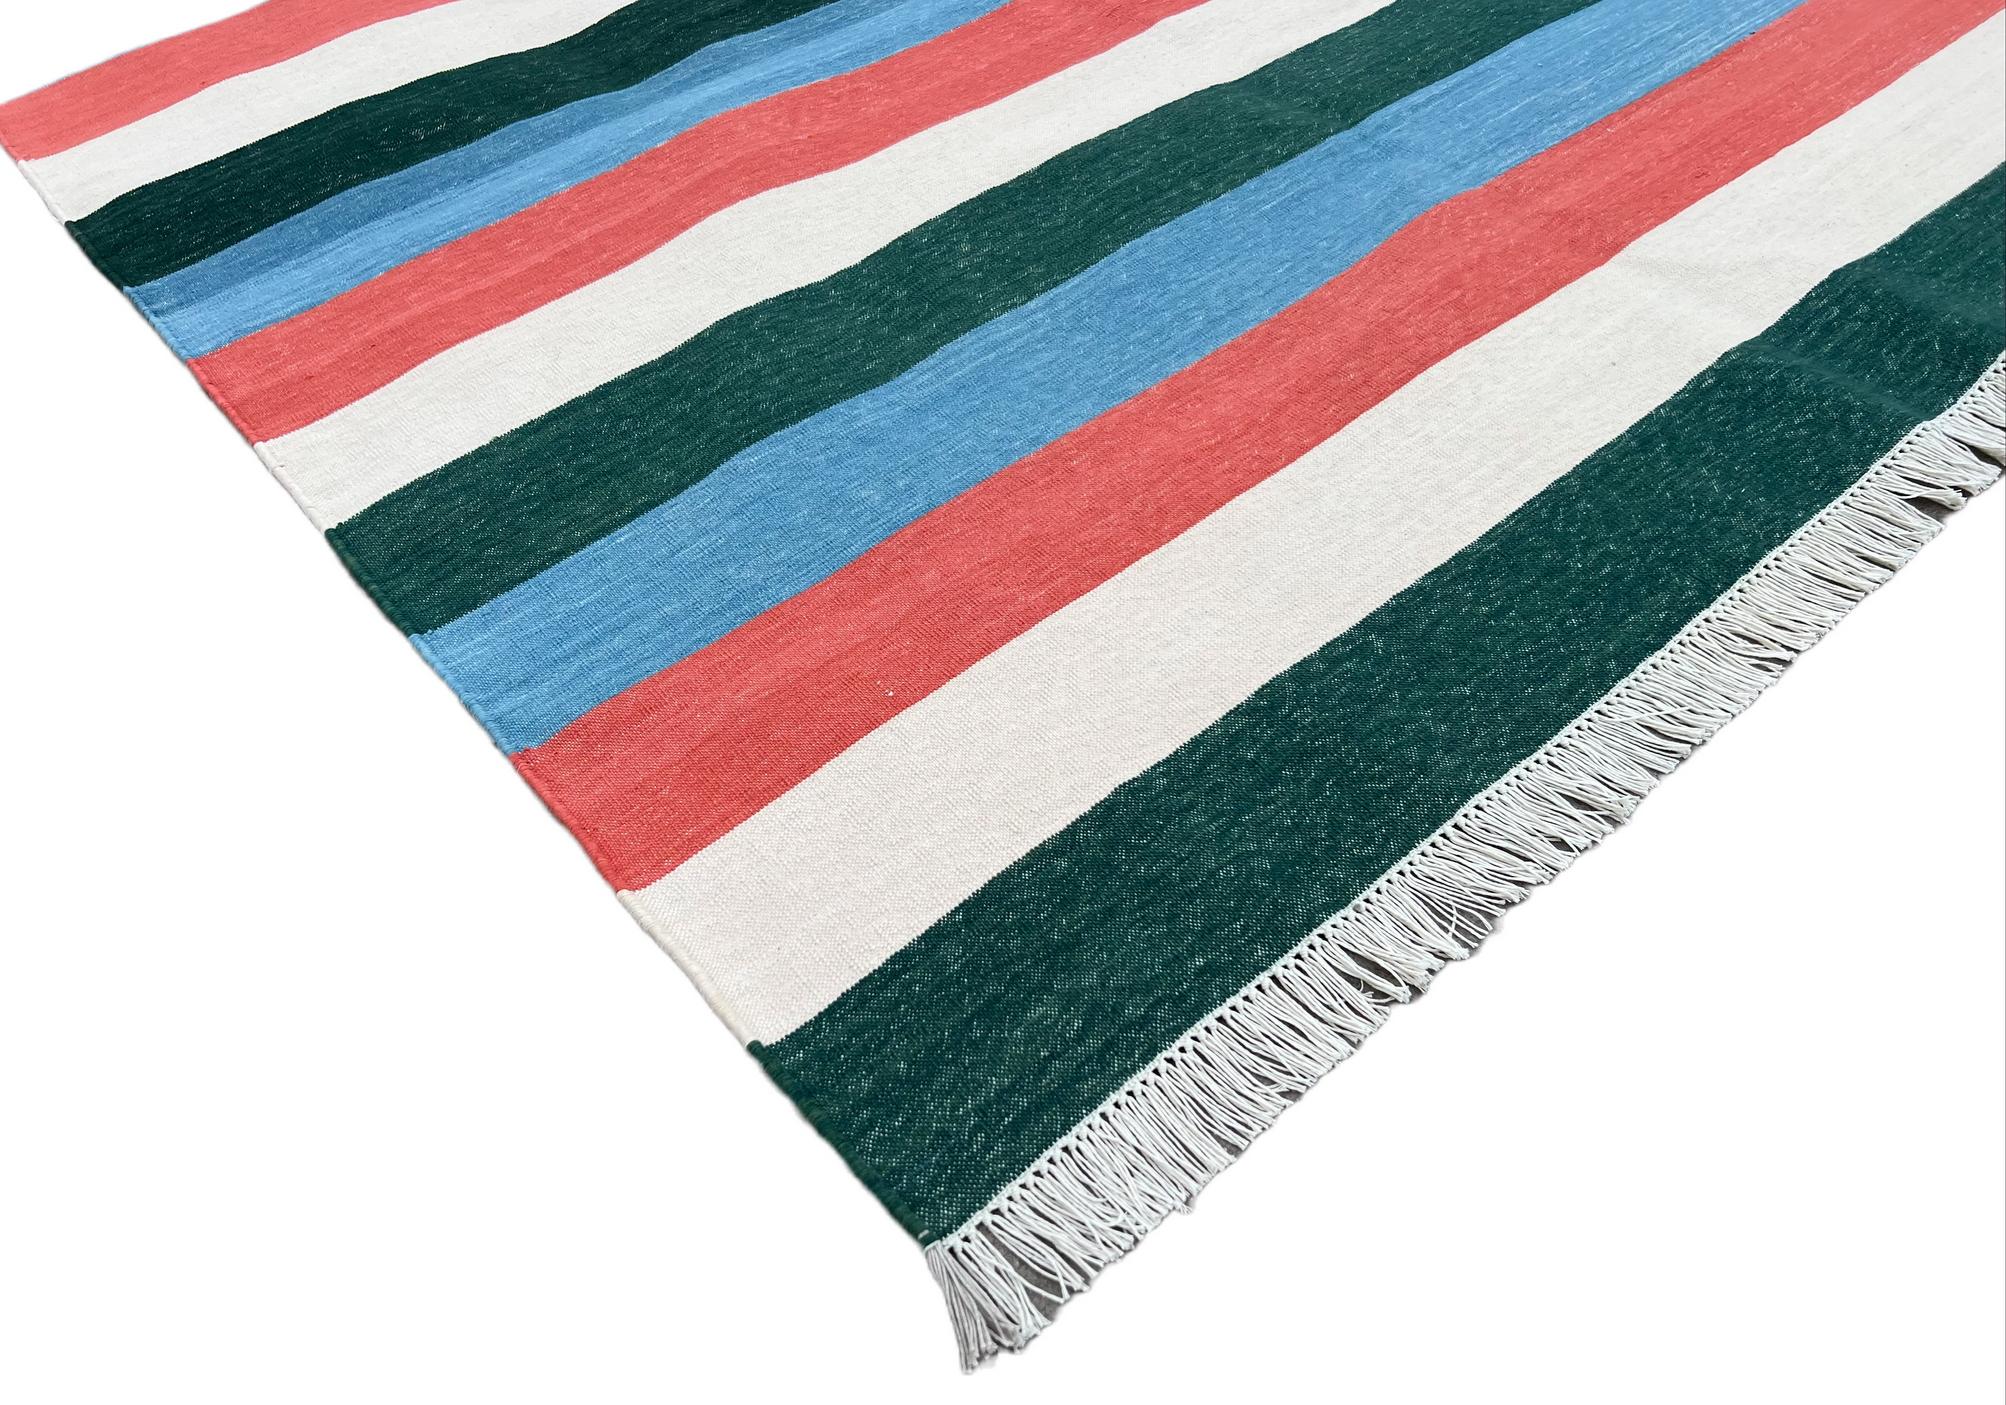 Mid-Century Modern Handmade Cotton Area Flat Weave Rug, 8x10 Green And Blue Striped Indian Dhurrie For Sale